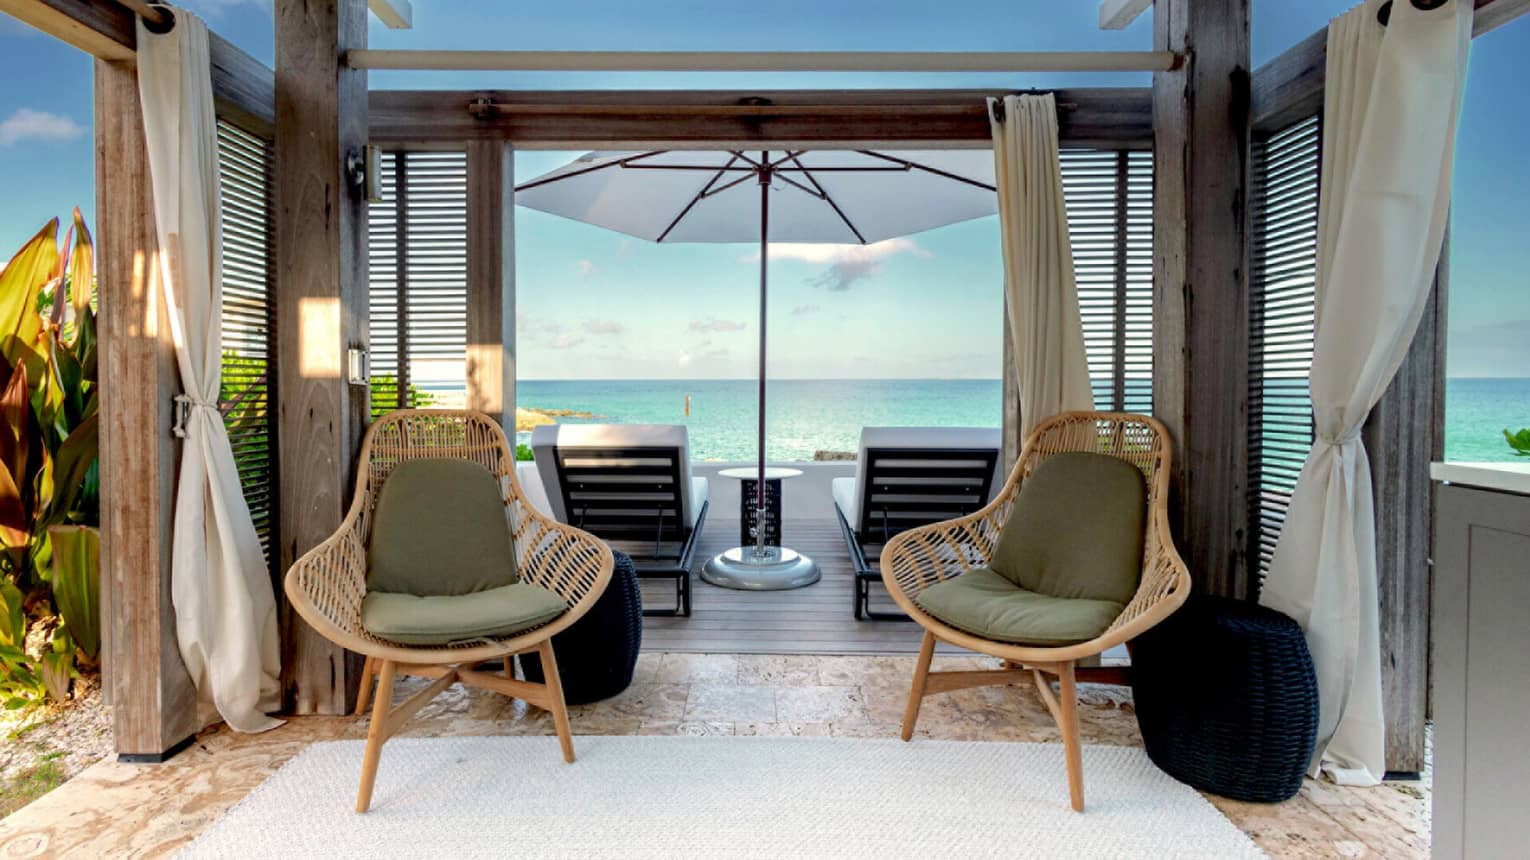 Two outdoor chairs with cushions underneath a spacious, wooden cabana, in front of a deck with a large umbrella and two lounge chairs facing the ocean